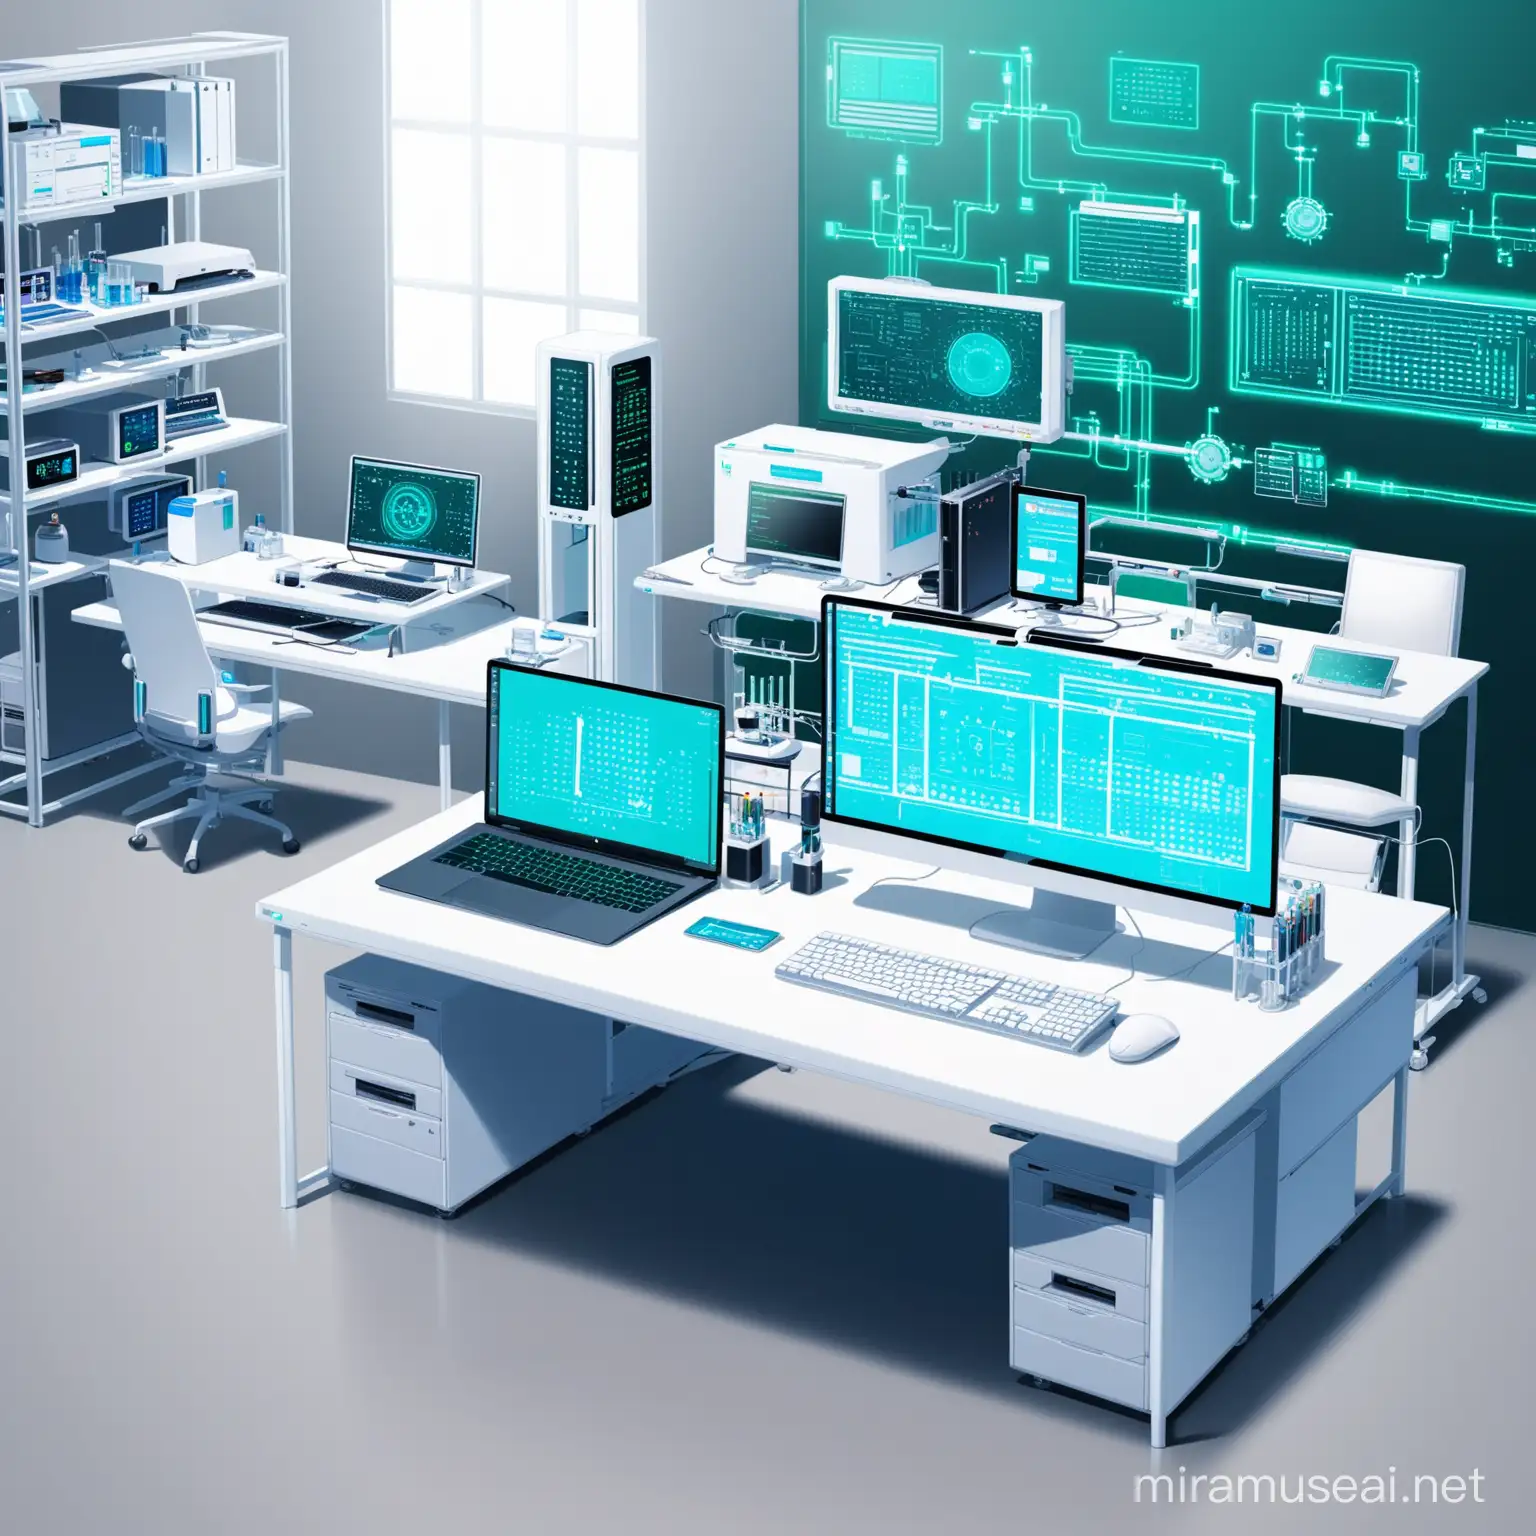 A super modern Nano technology laboratory with computer, laptop, screen, laboratory tools, a chair.
Background Persian designs.